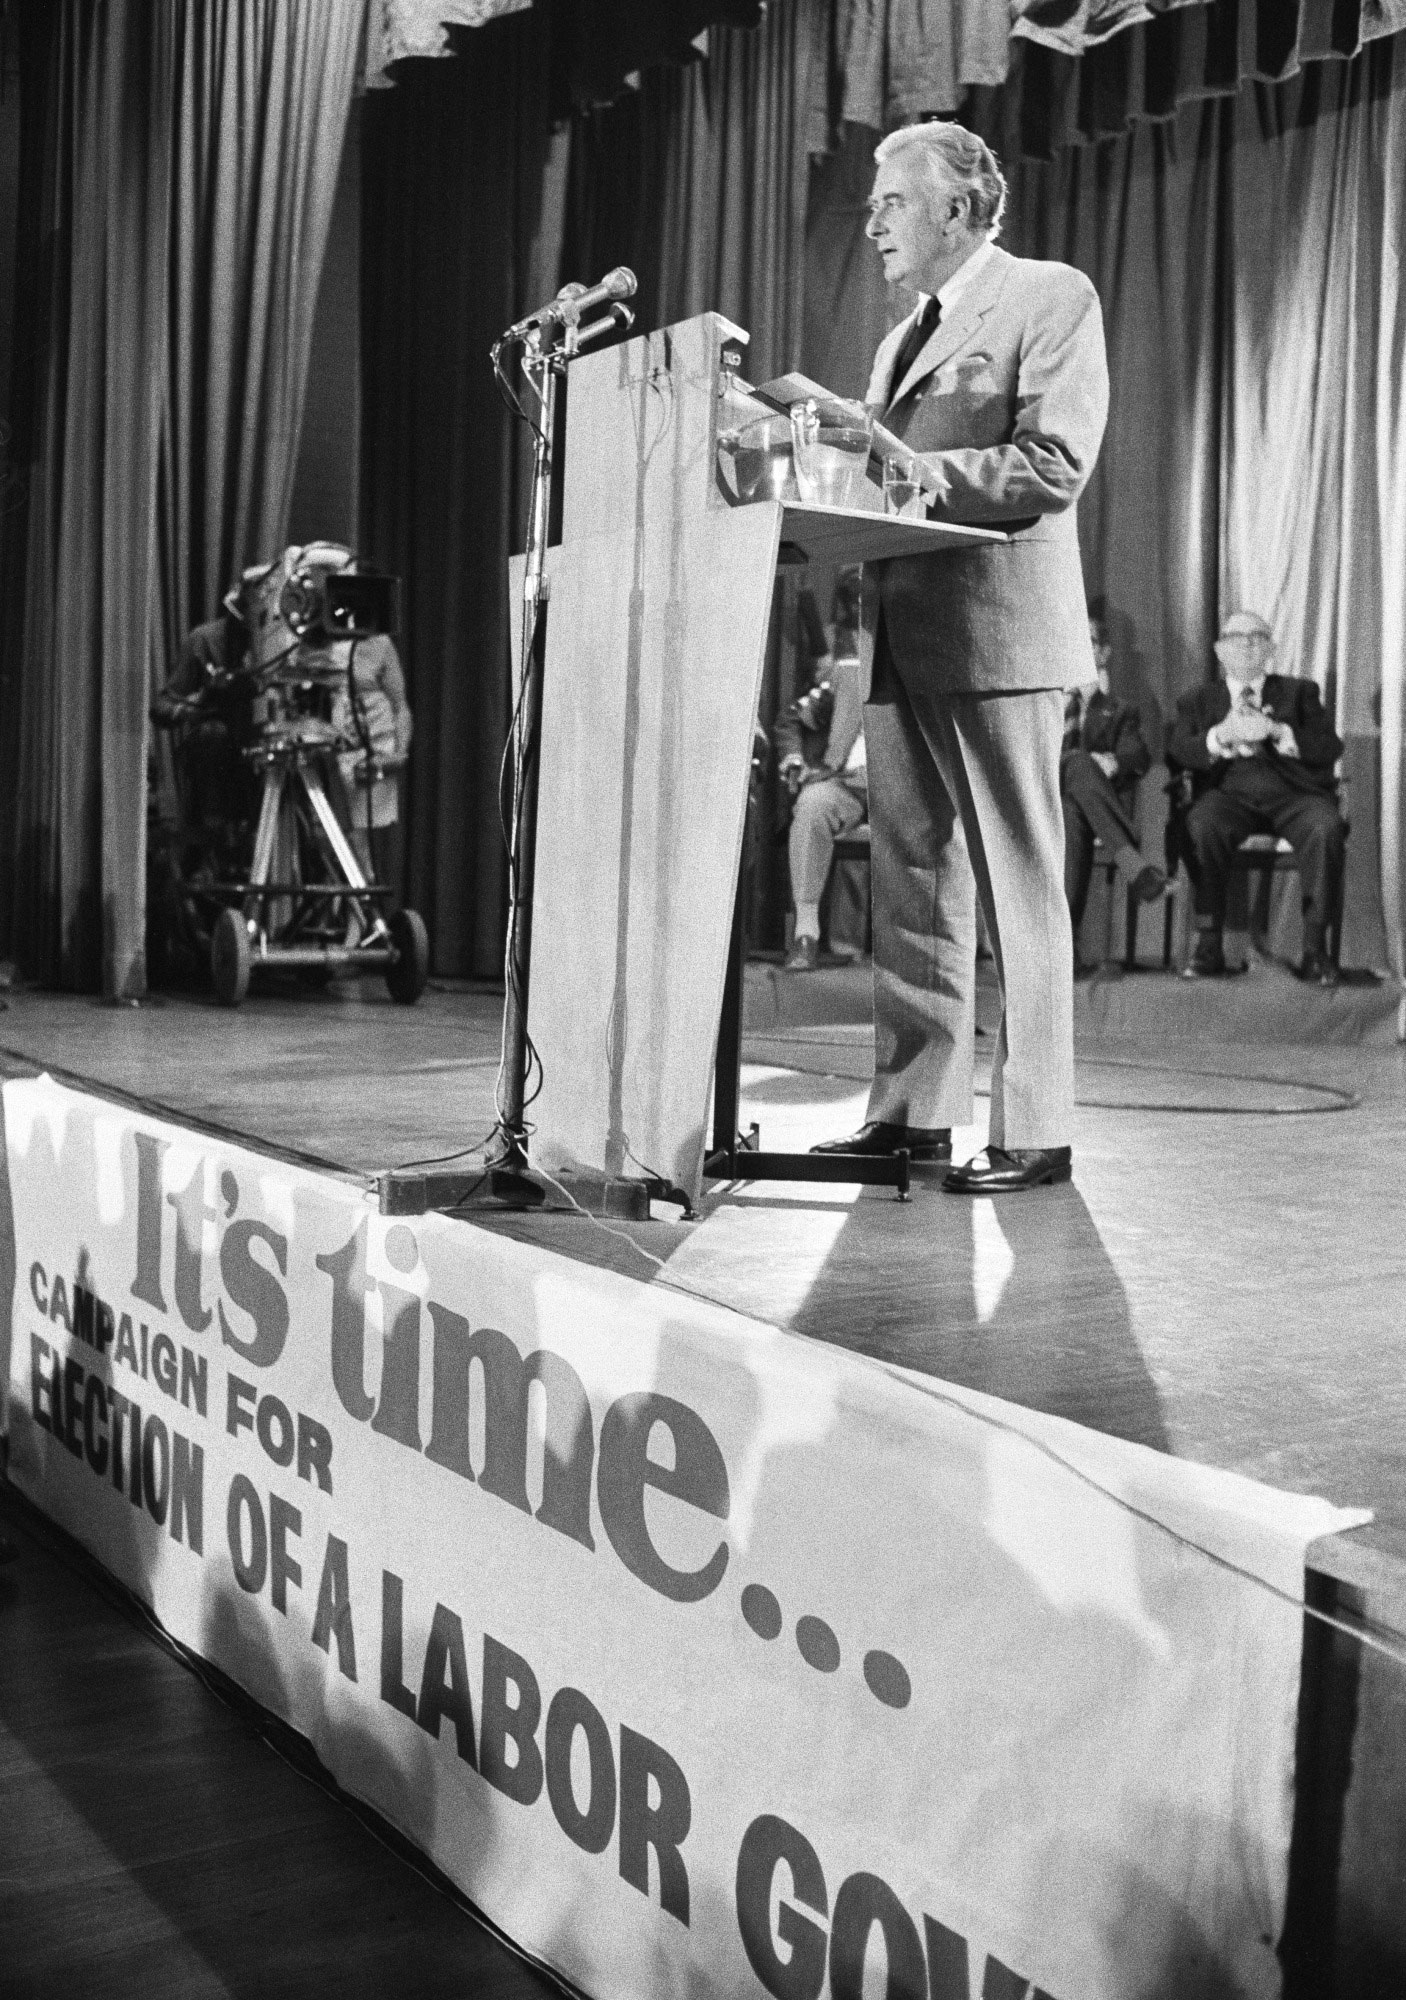 Gough Whitlam delivers the Labour Party's policy speech at Blacktown Civic Centre in Sydney, 1972.